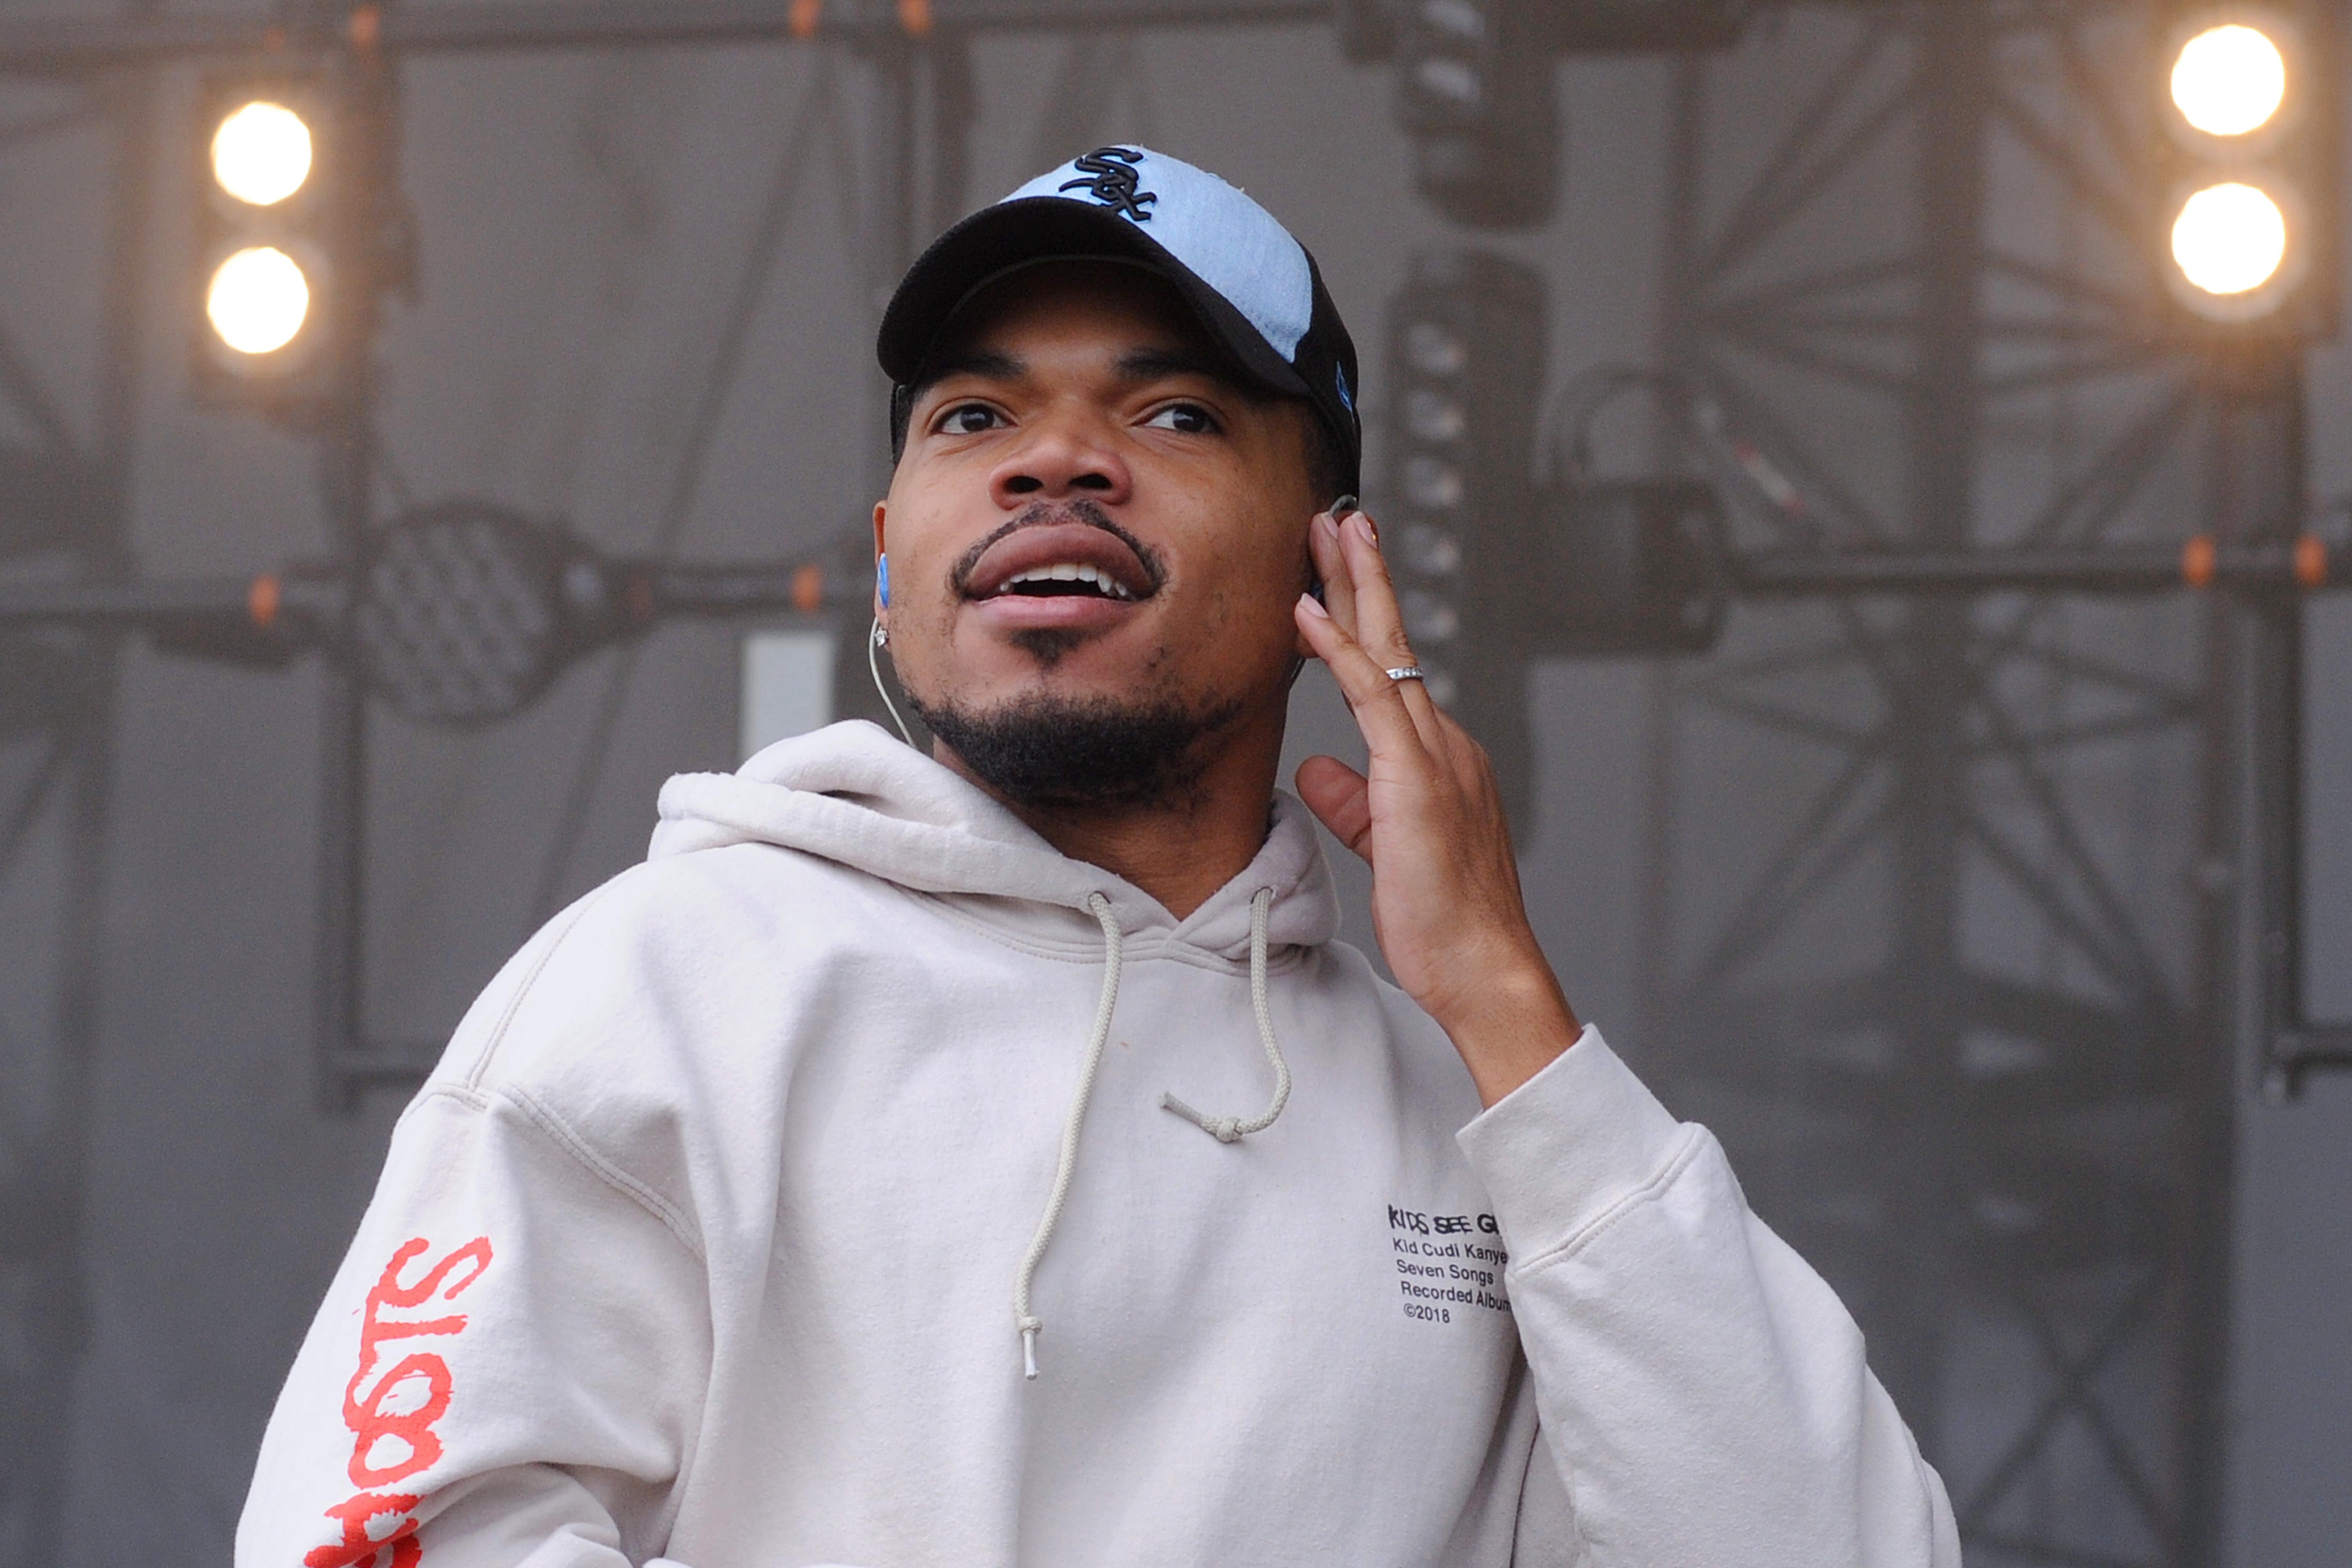 Chance The Rapper performs onstage during Nickelodeon's Second Annual SlimeFest at Huntington Bank Pavilion on June 08, 2019 in Chicago, Illinois. (Photo by Timothy Hiatt/Getty Images  for Nickelodeon)